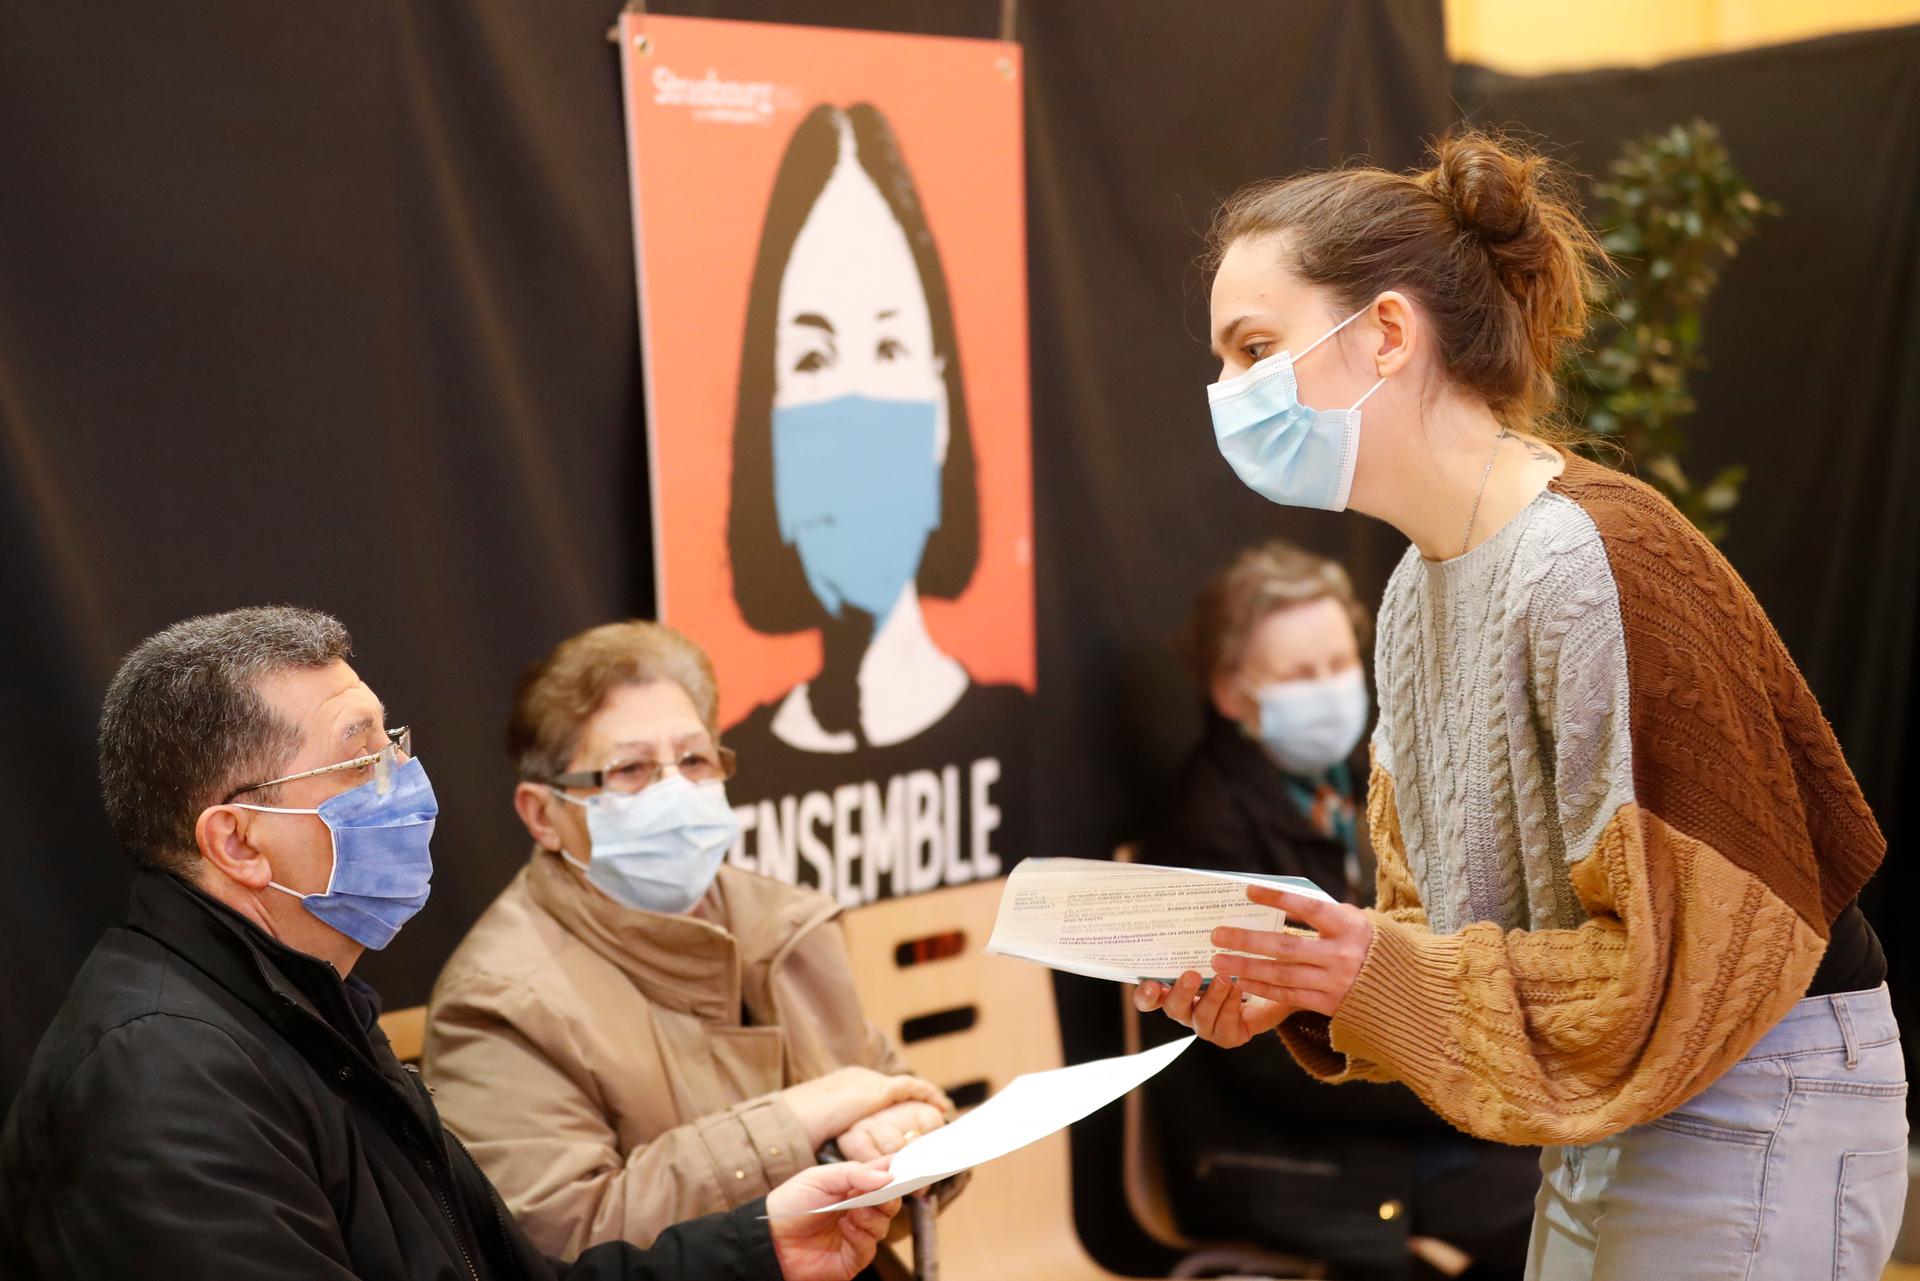 An administrative worker explains to people how to fill up the national vaccination certificate in a vaccination center in Strasbourg, France, March 18, 2021. France is set to announce new coronavirus restrictions on Thursday, including a potential lockdo